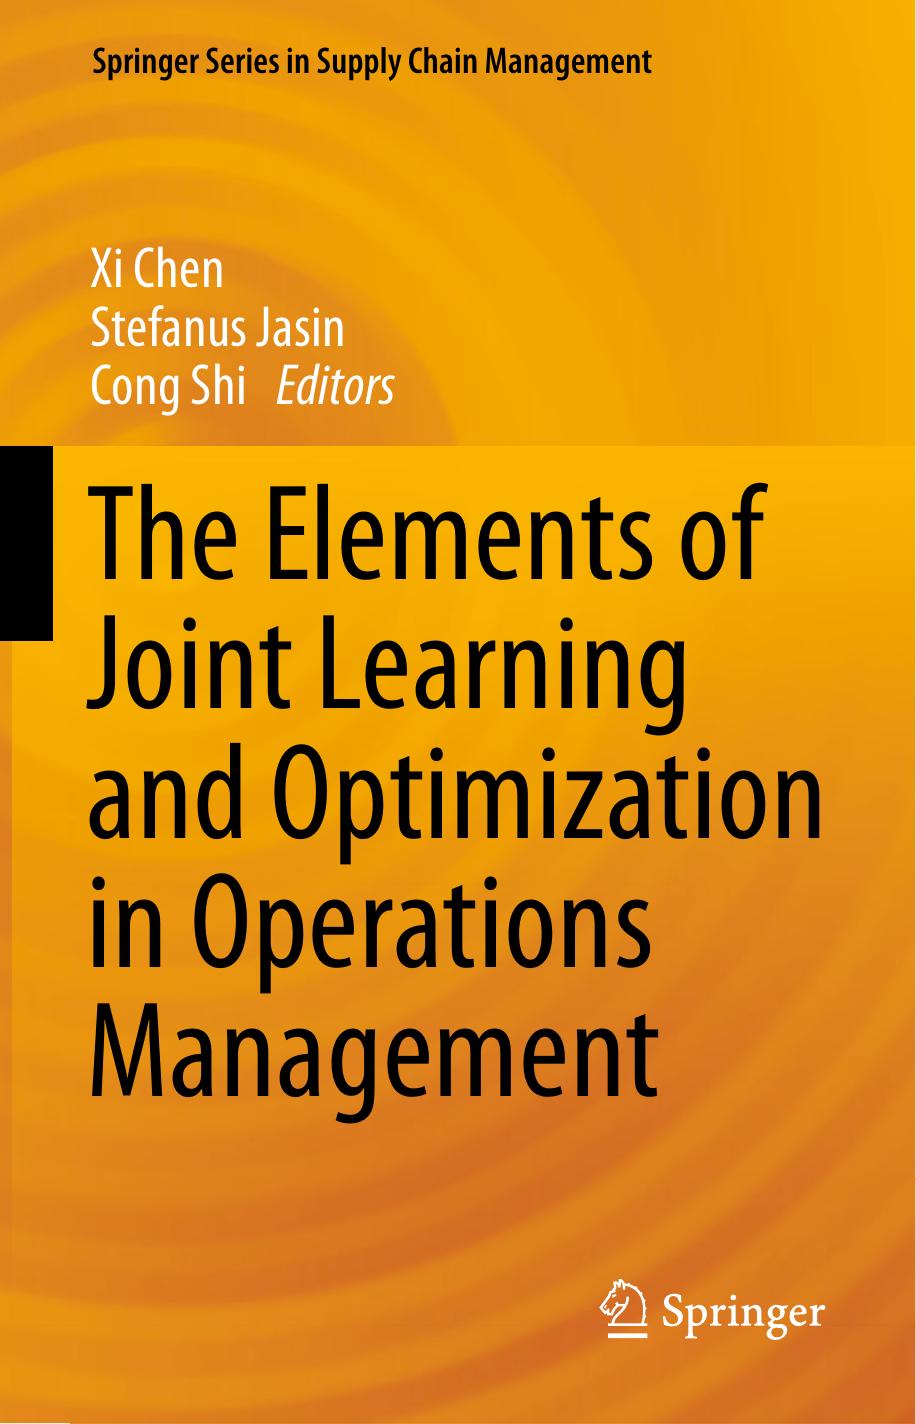 The Elements of Joint Learning and Optimization in Operations Management 2022